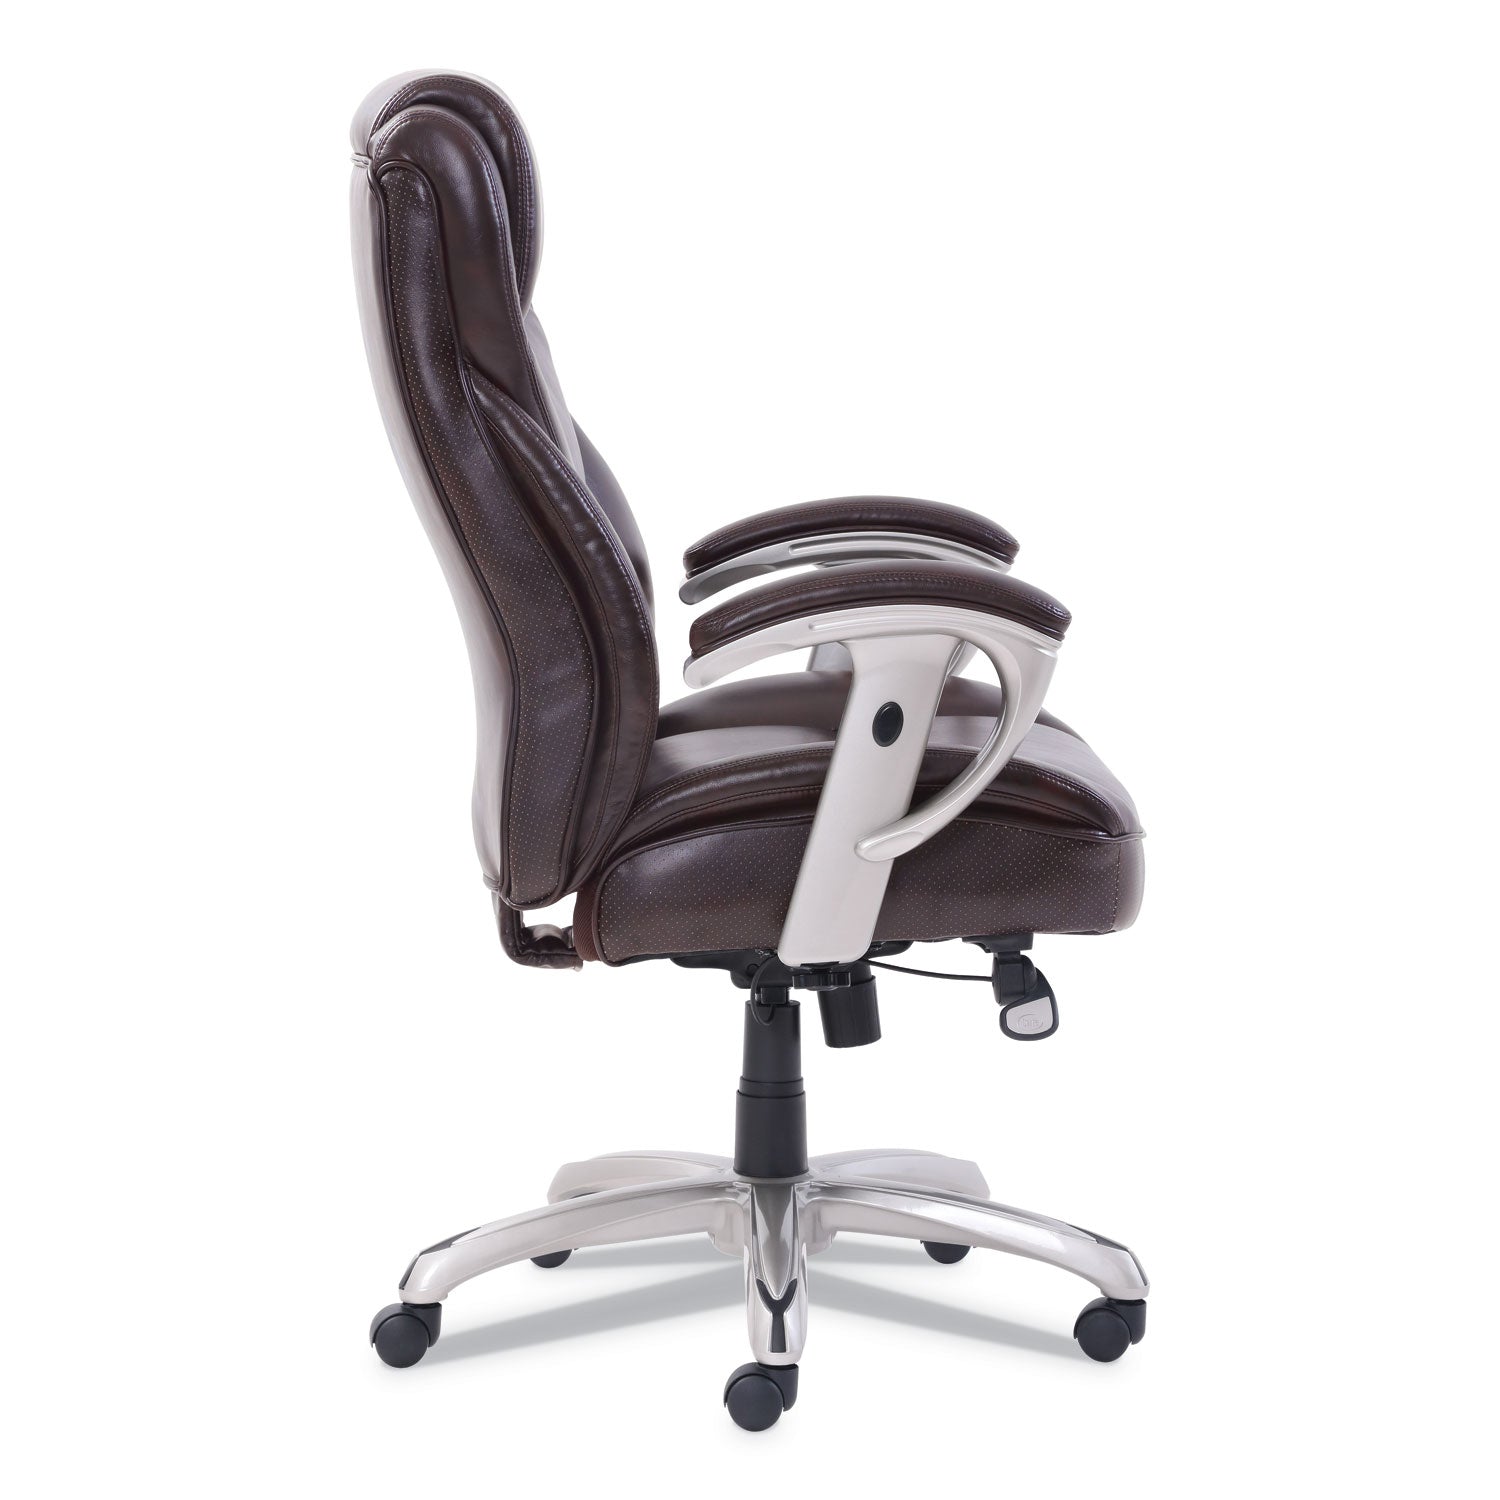 emerson-big-and-tall-task-chair-supports-up-to-400-lb-195-to-225-seat-height-brown-seat-back-silver-base_srj49416brw - 3